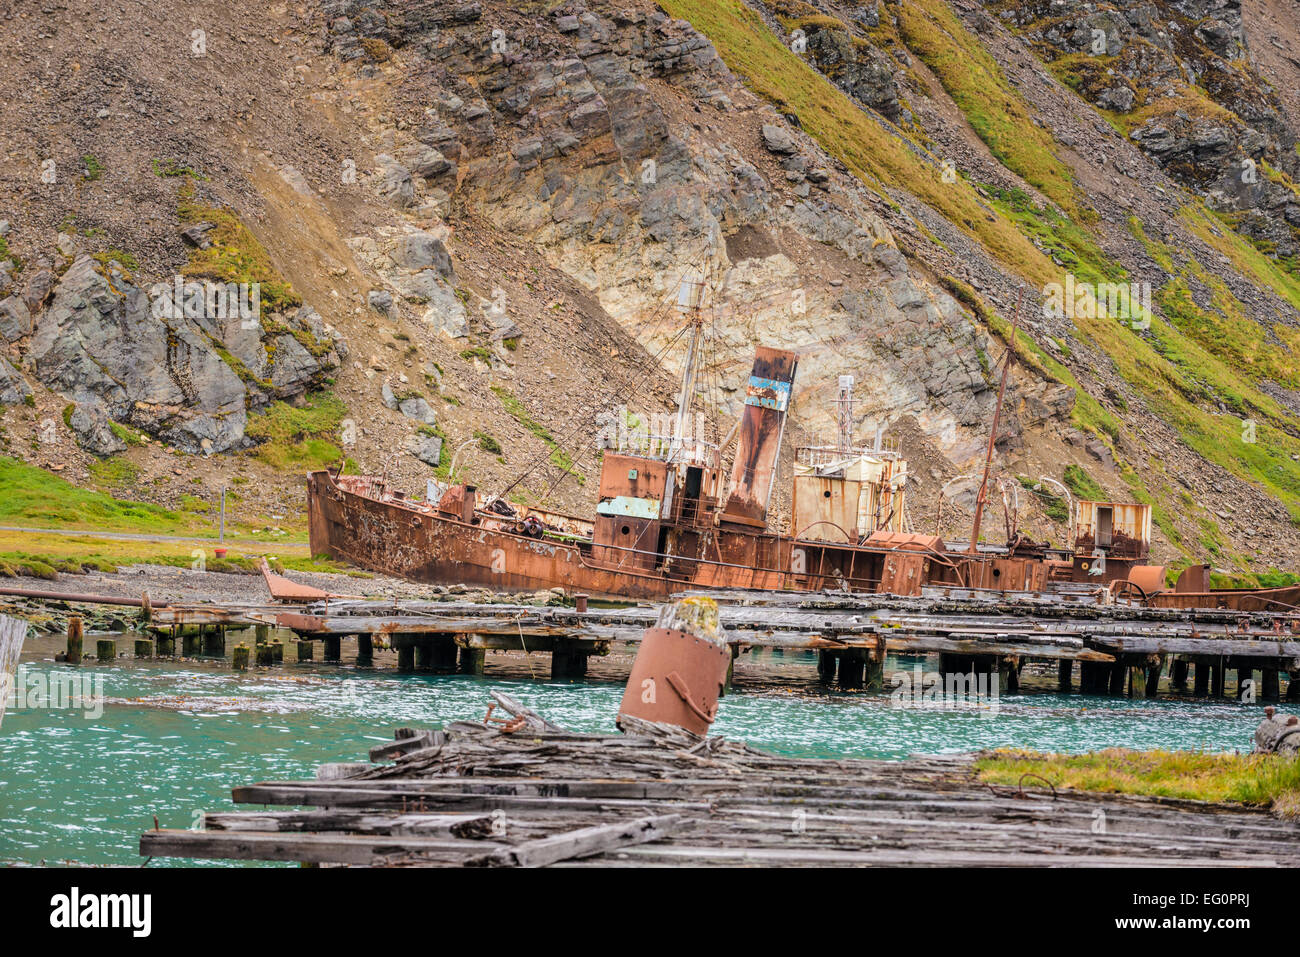 Rusting whaling vessel at Grytviken whaling station, South Georgia, Antarctica Stock Photo